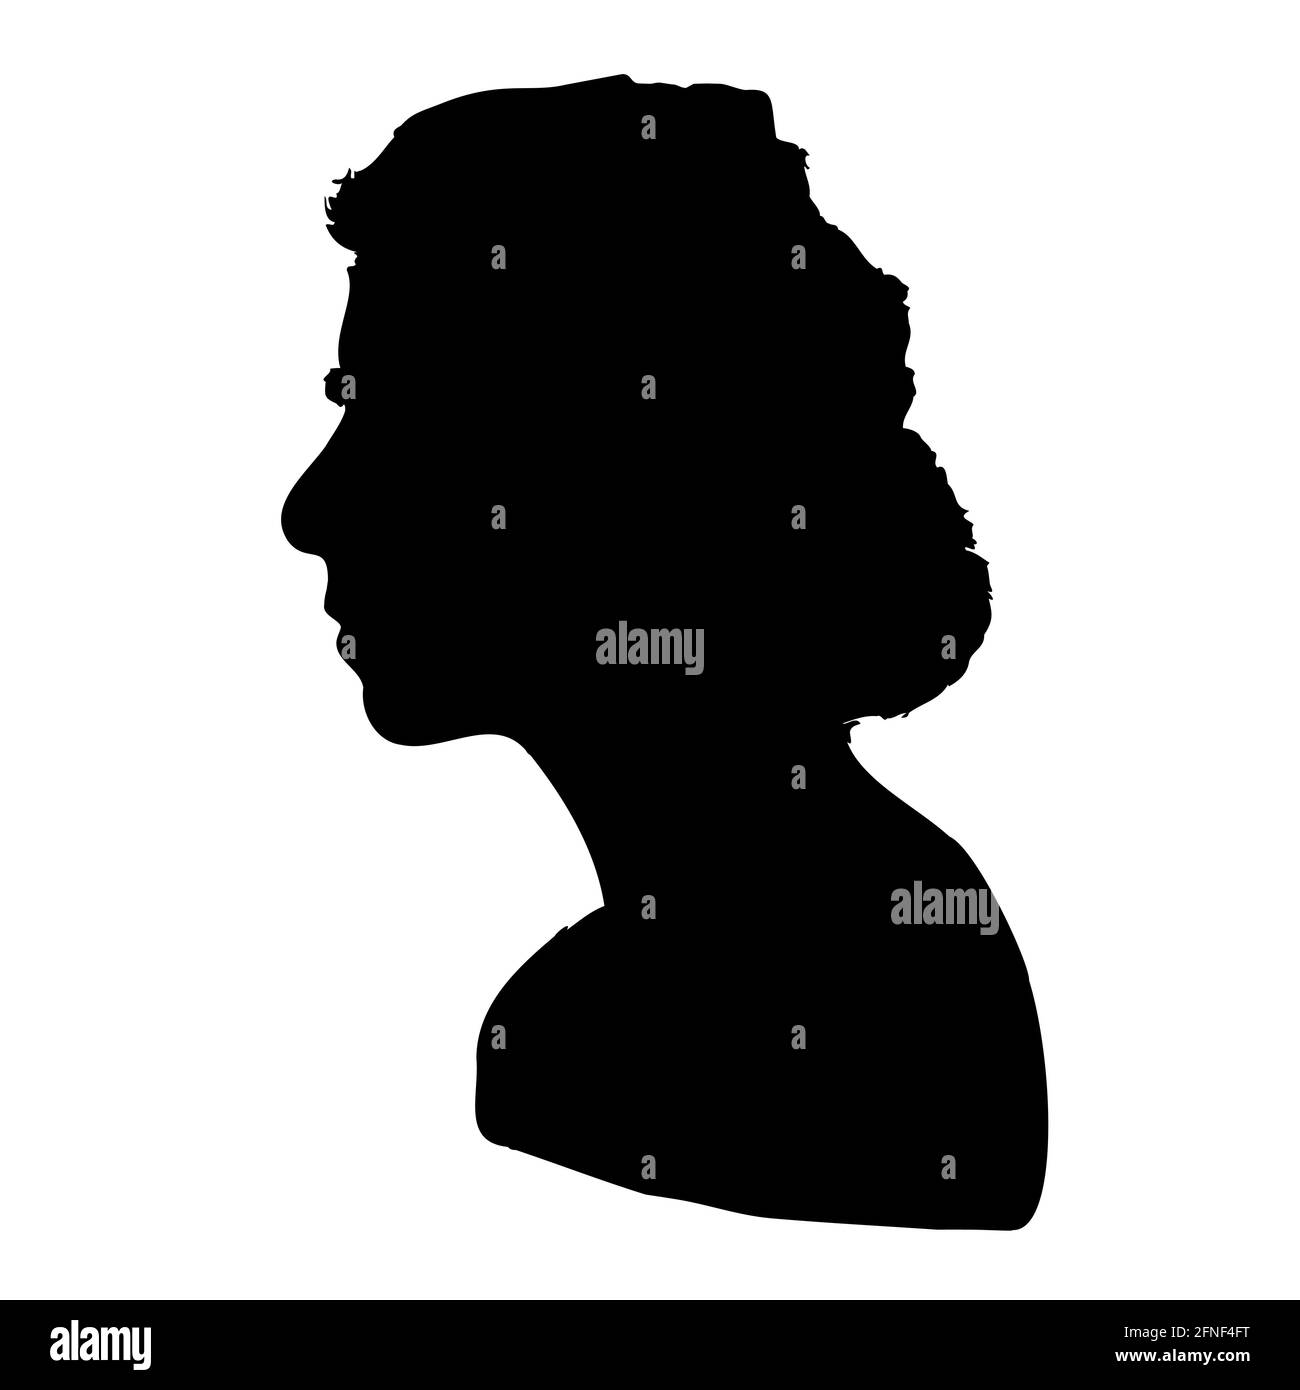 Silhouette of elegant woman face profile. Black grey on white background. Vector illustration. Stock Vector